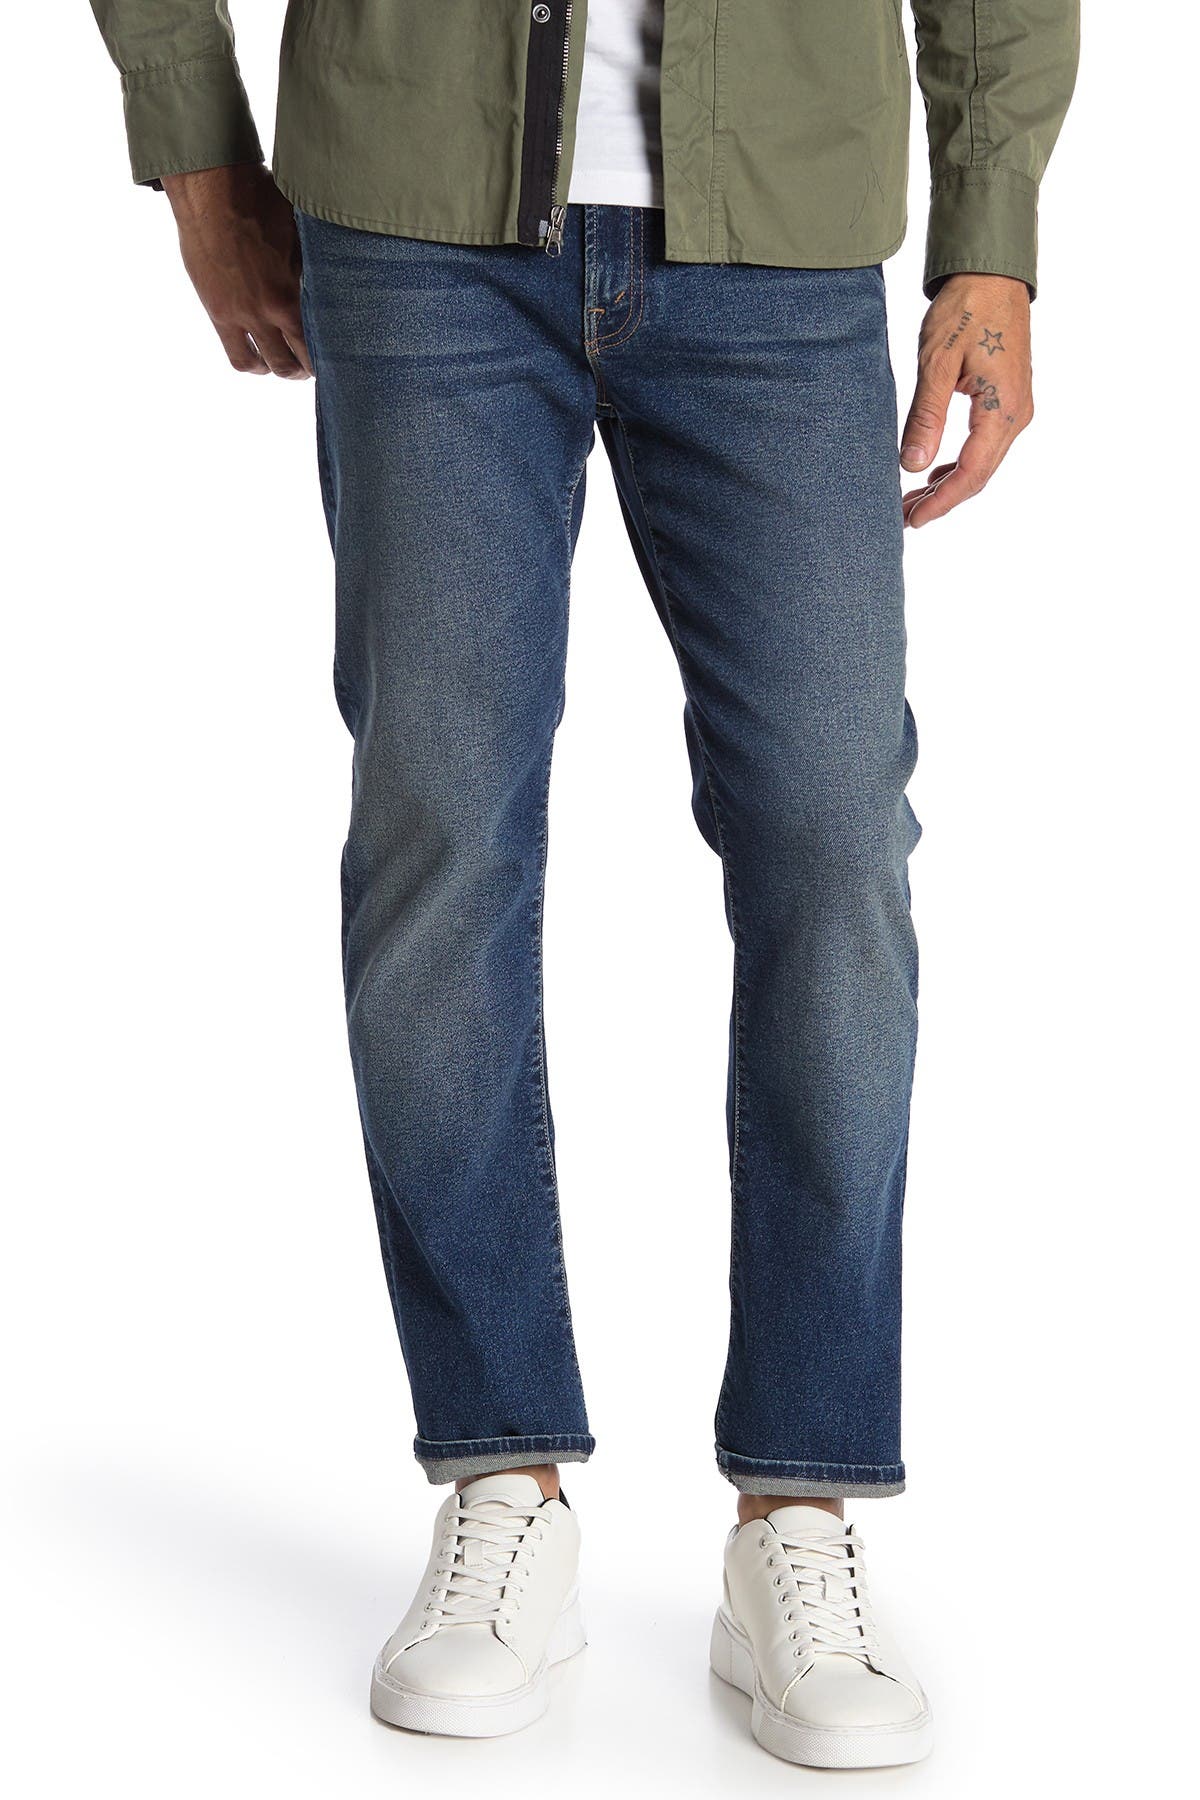 ring of fire mens jeans